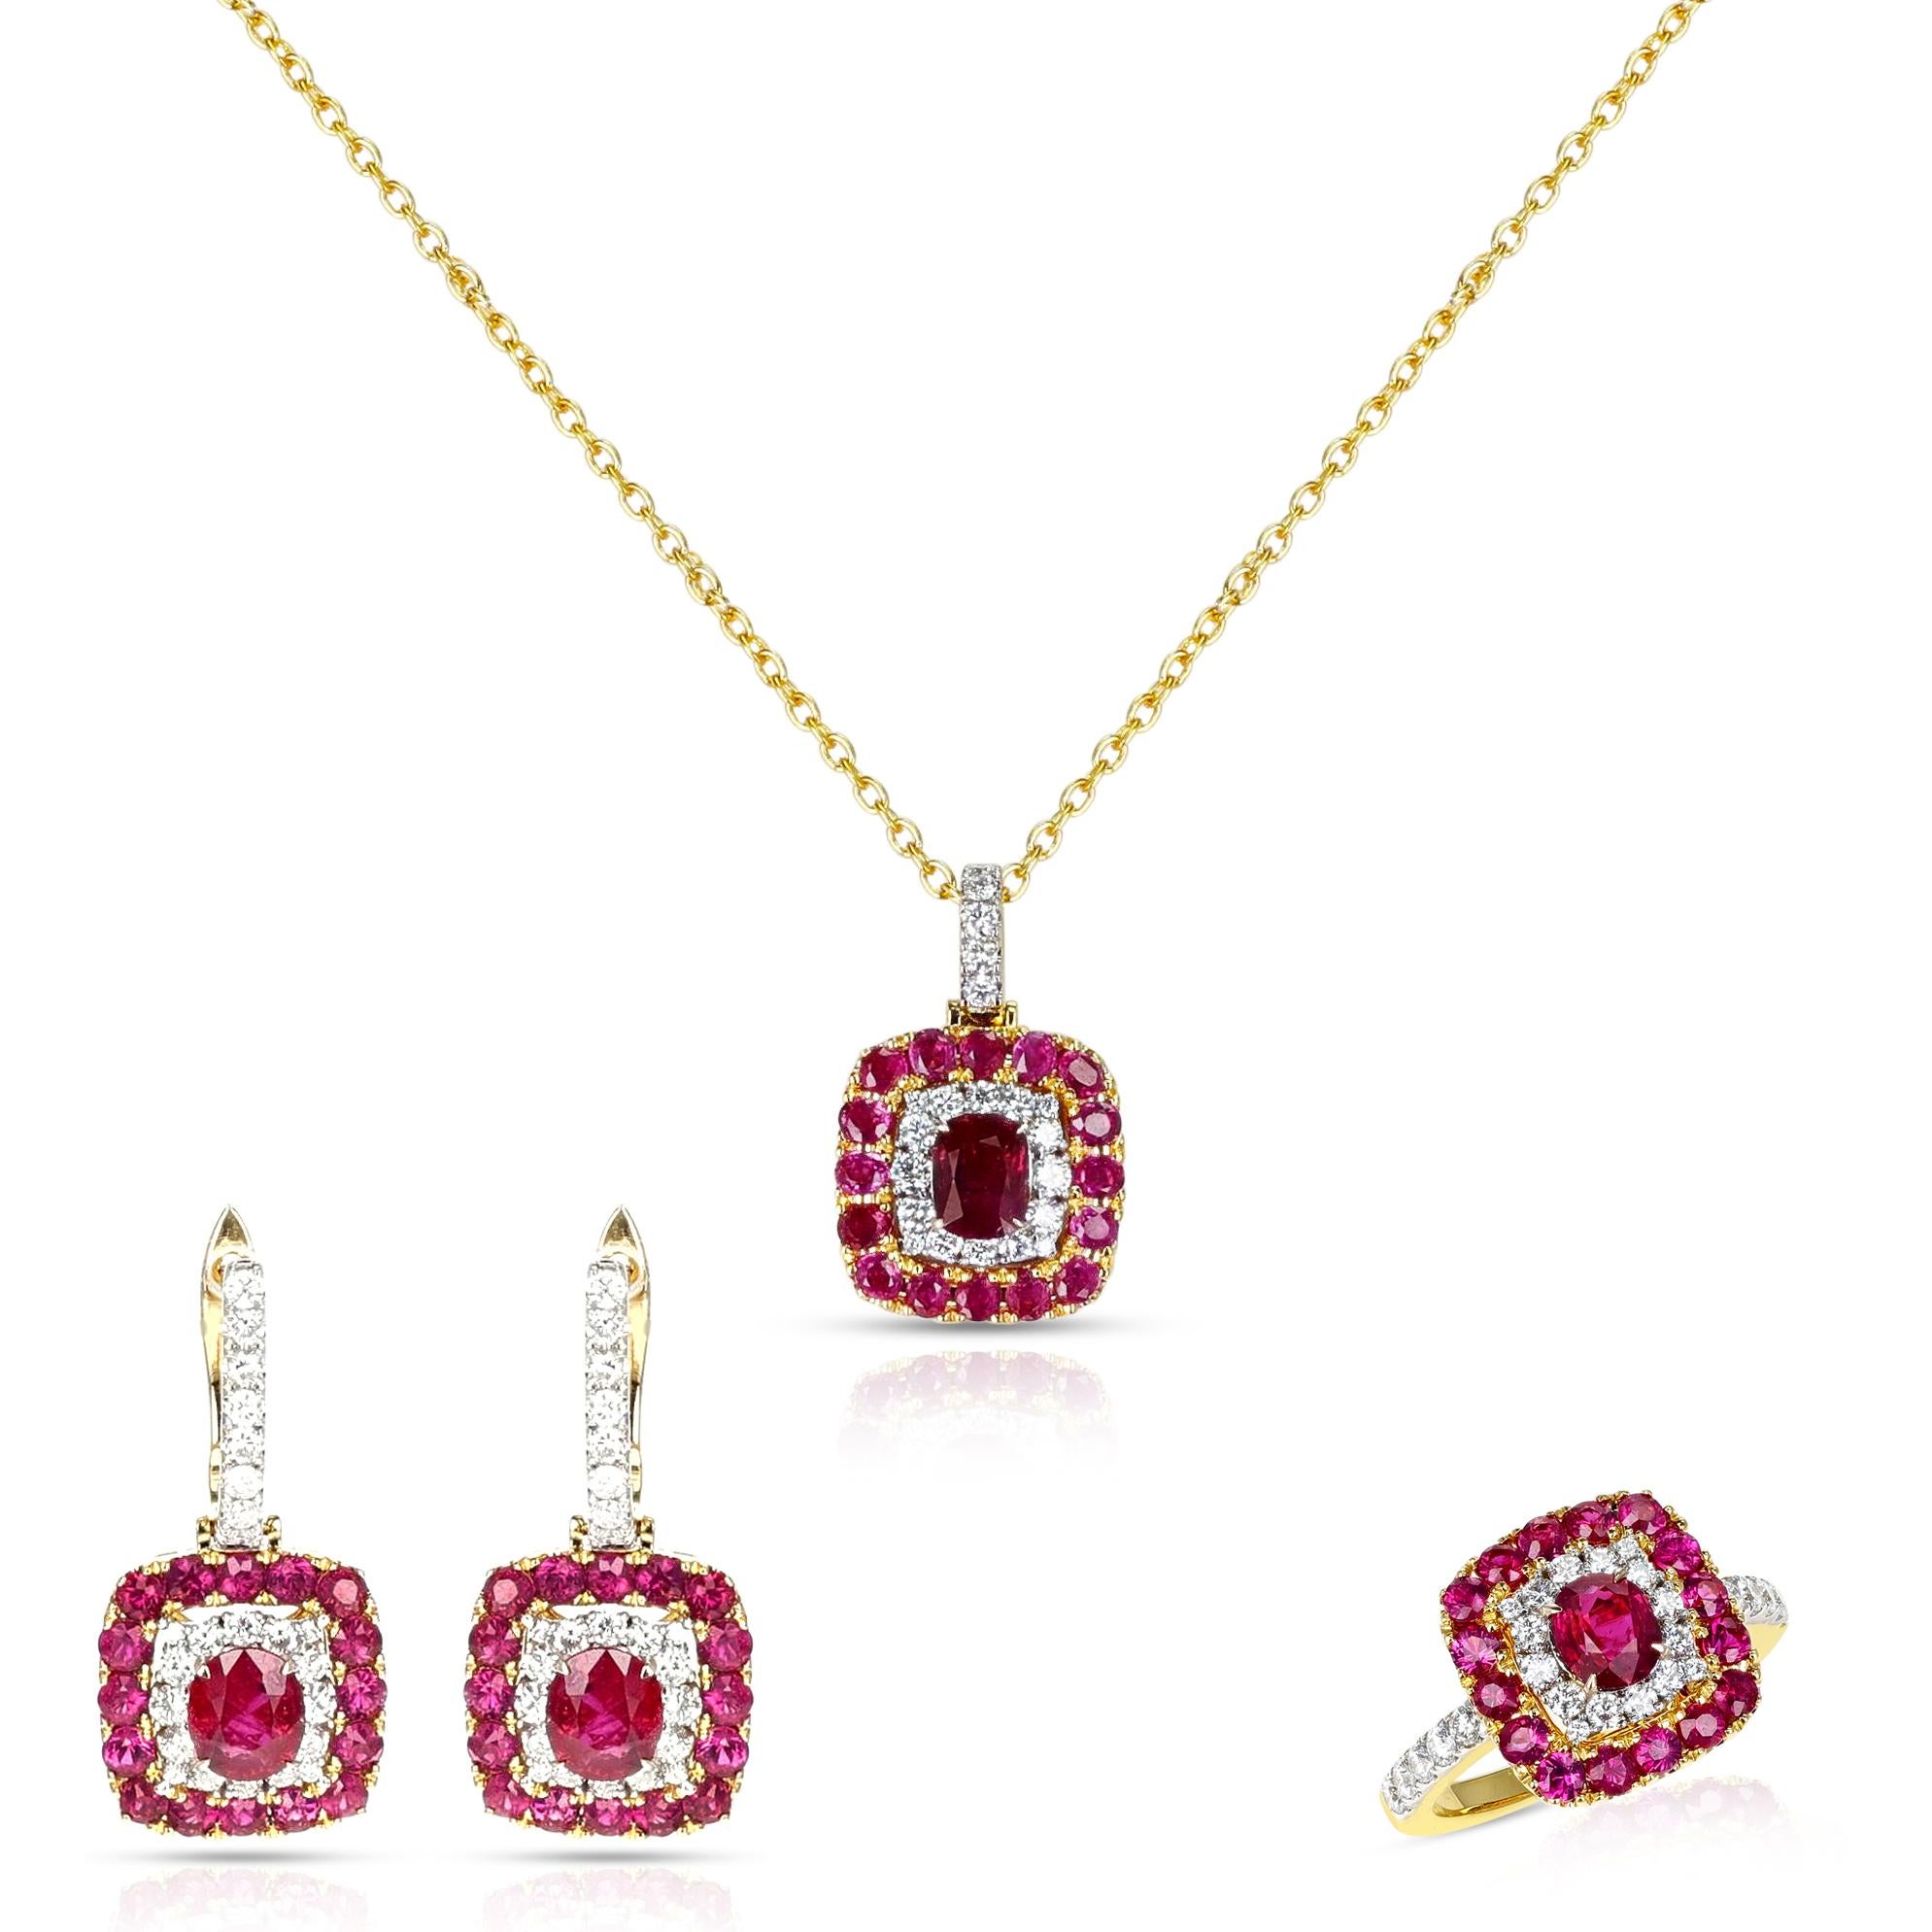 Unheated Burma Ruby Pigeon Blood Set with Ring, Pendant and Earrings, 18k In Excellent Condition For Sale In New York, NY